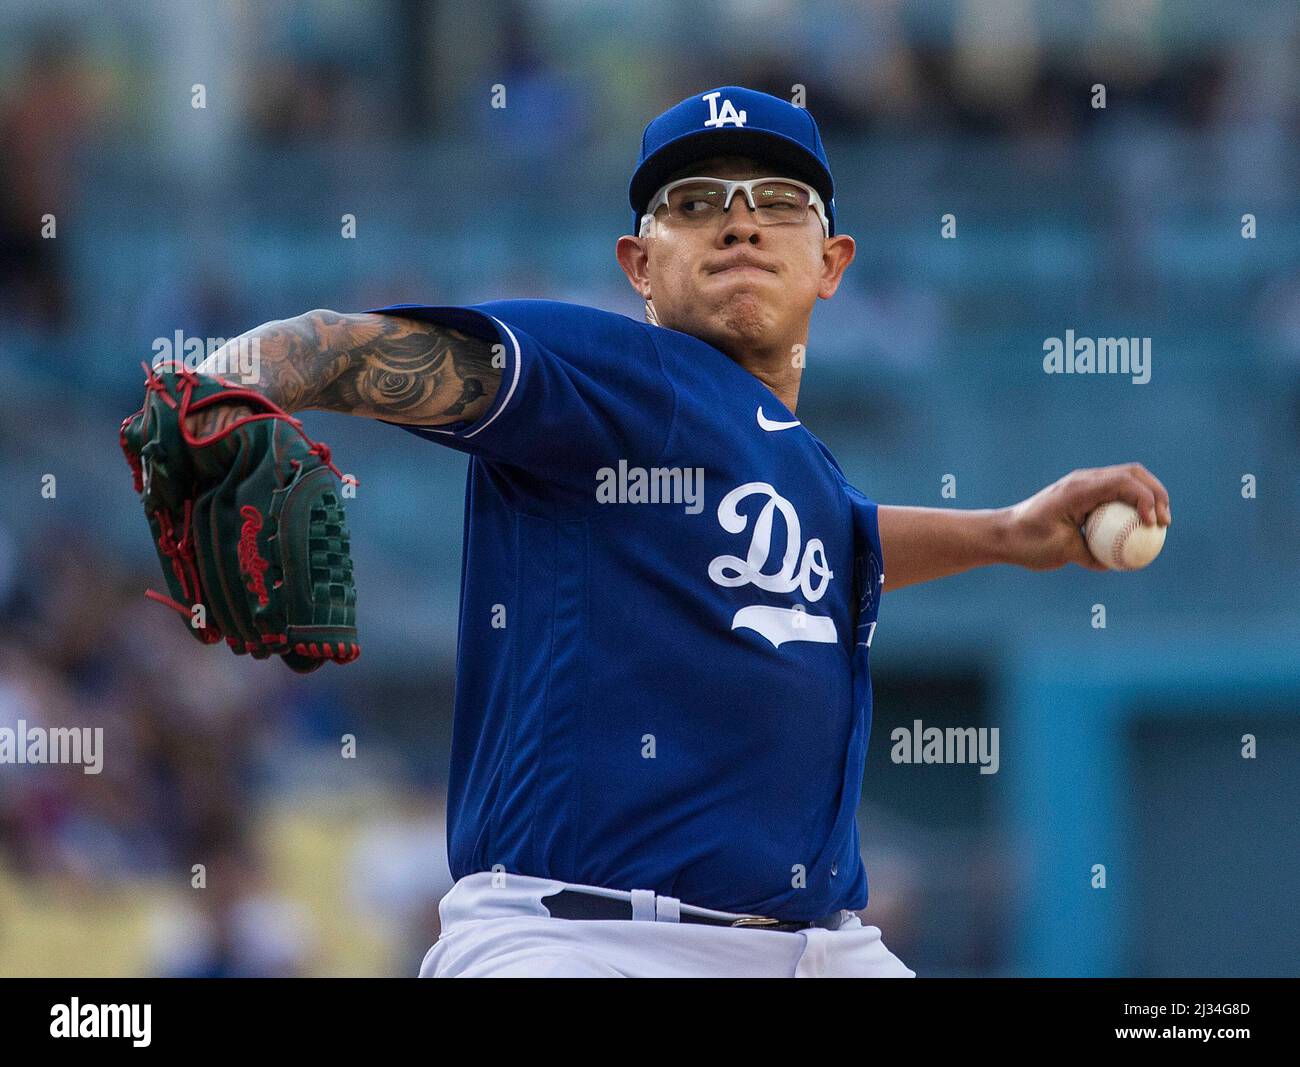 Los Angeles Dodgers pitcher Julio Urias (7) pitches the ball during an MLB  regular season game against the San Francisco Giants, Tuesday, May 3, 2022  Stock Photo - Alamy